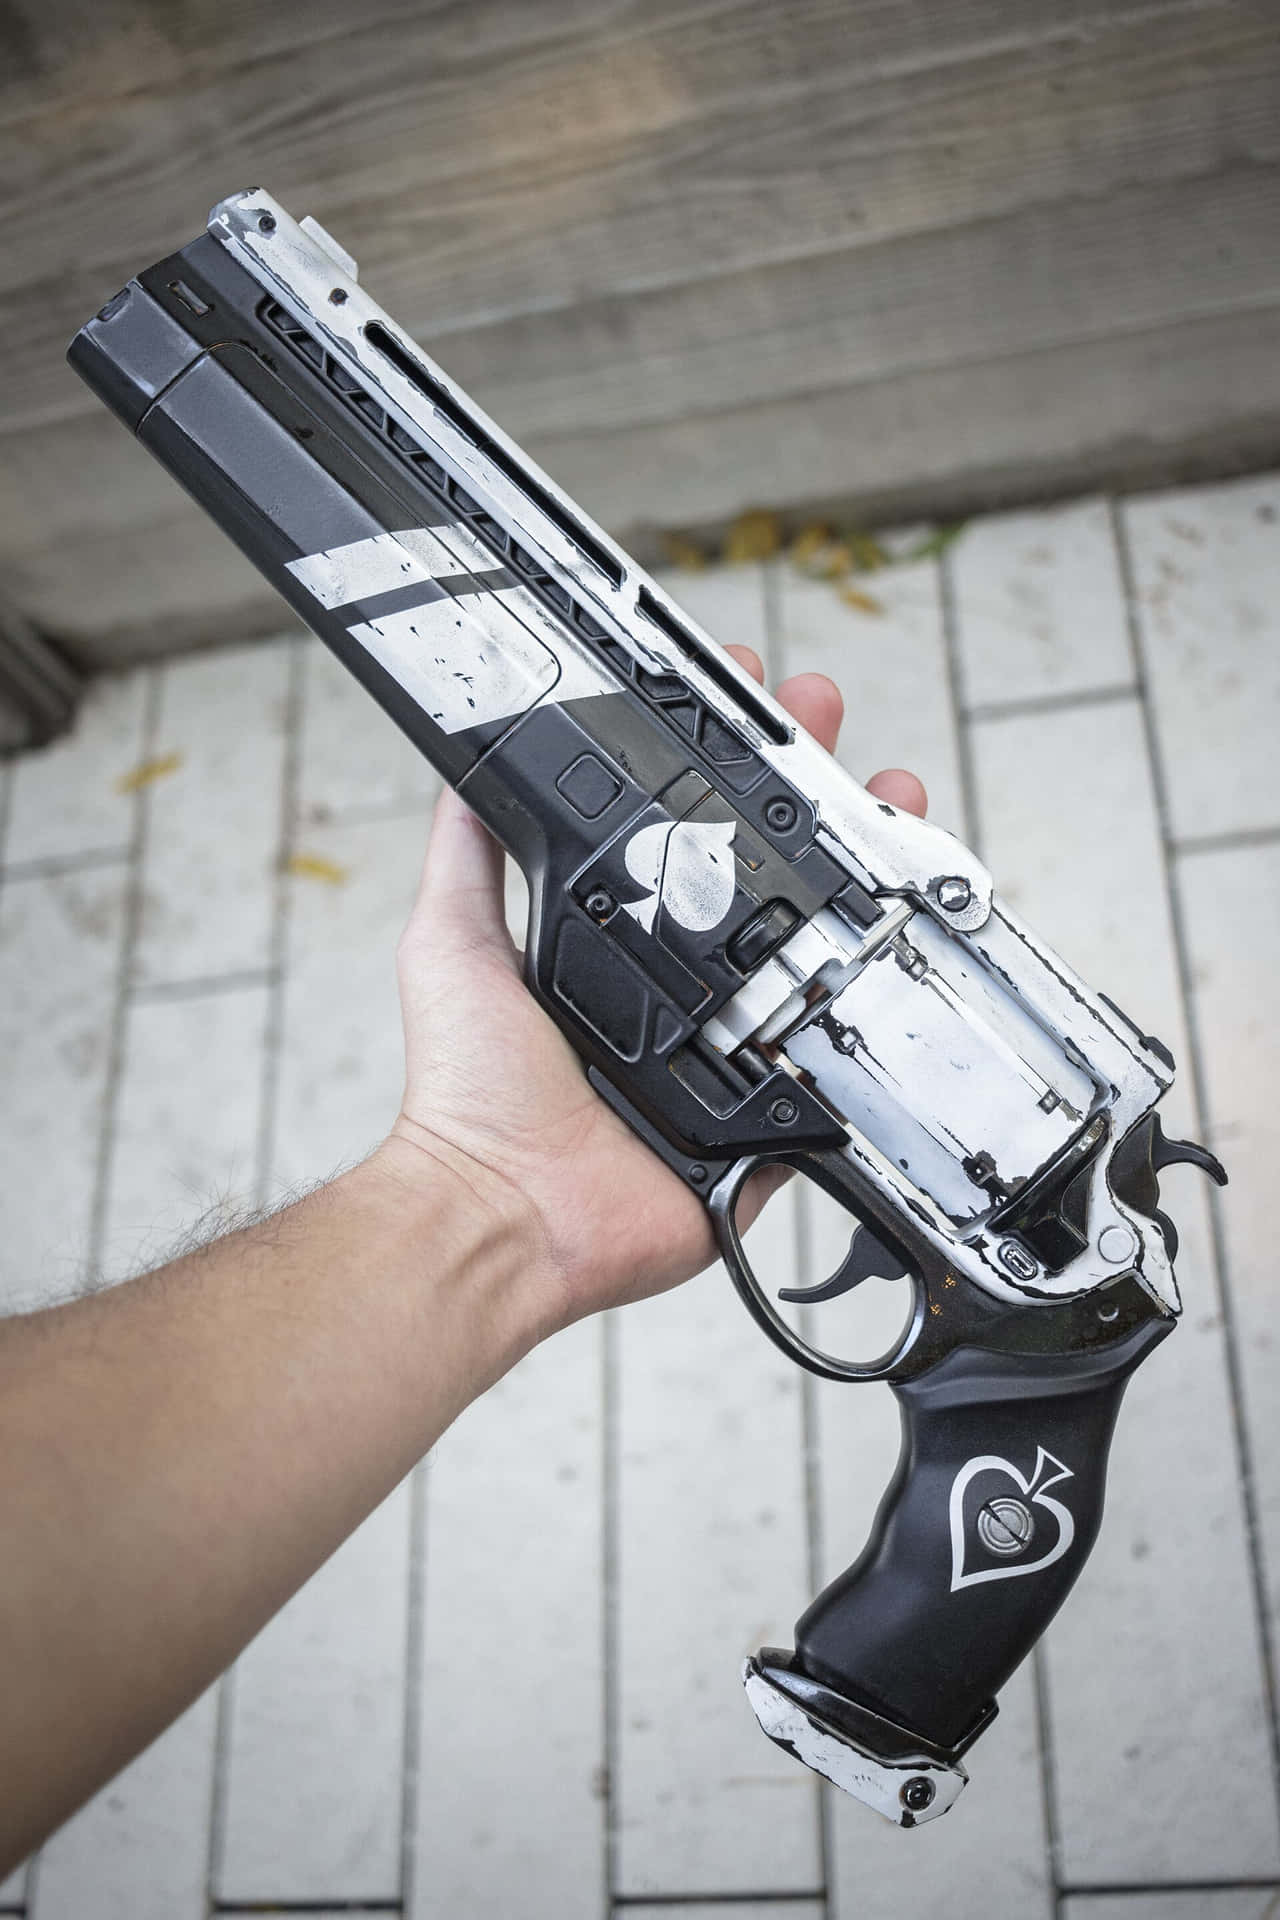 Powerful handgun to protect and defend